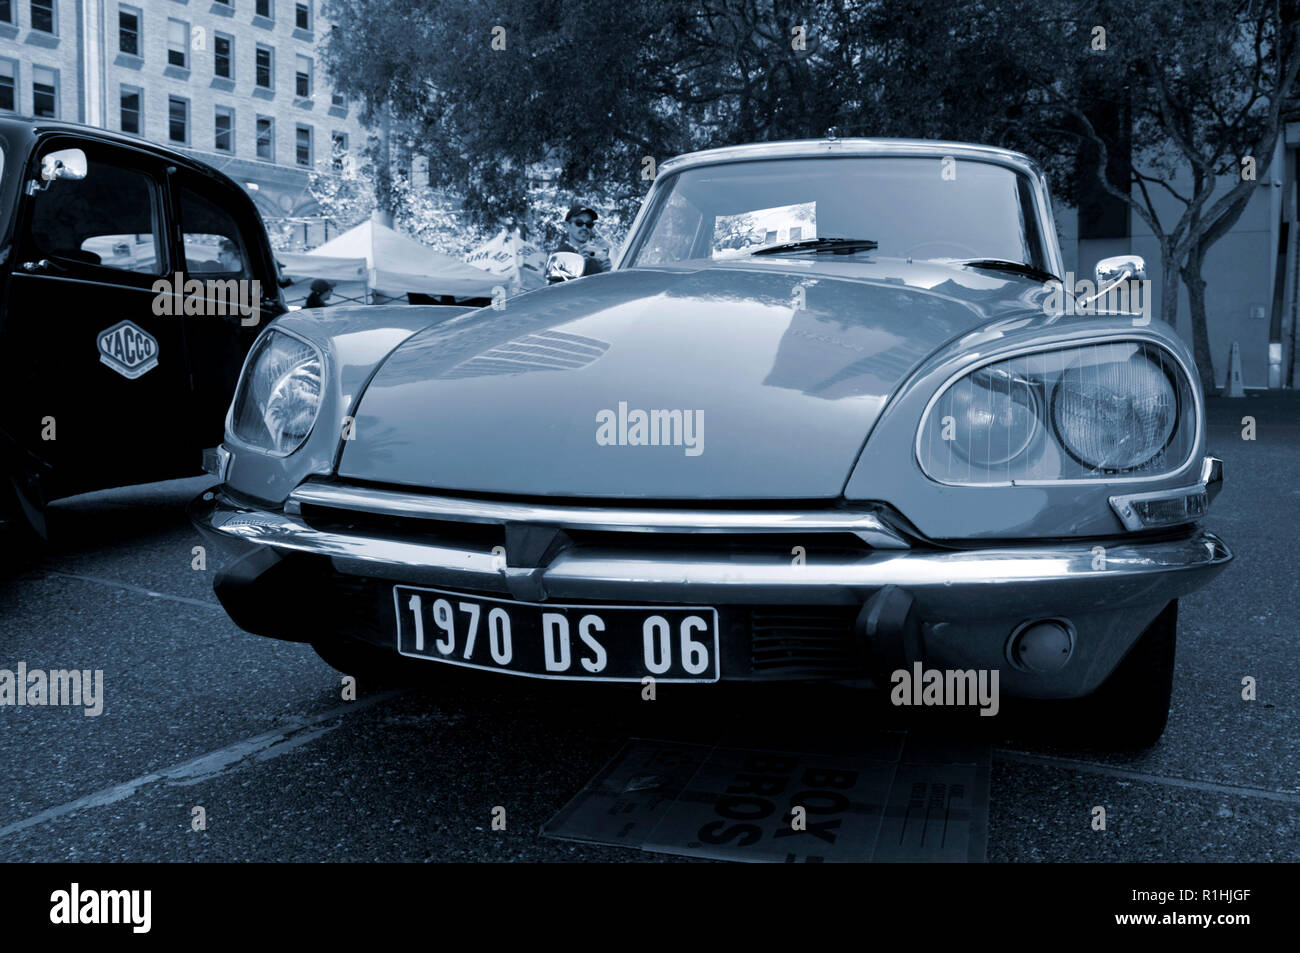 Citroën DS in San Francisco during the Bastille Day celebration Stock Photo